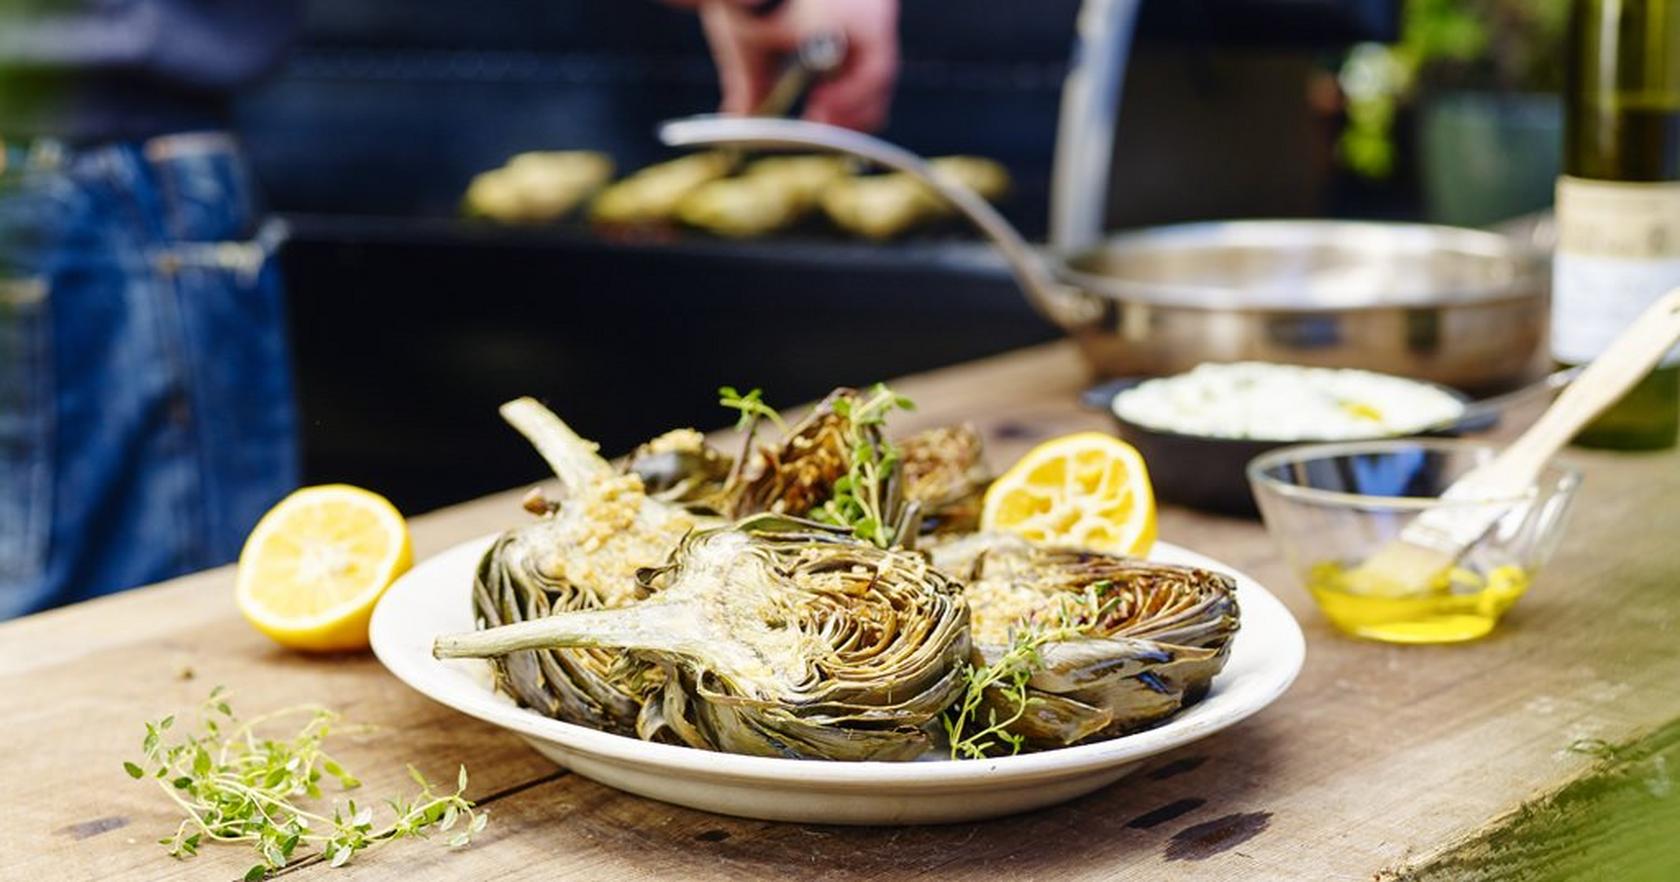 Grilled Artichokes with Sauce Gribiche by Chef Tyler Florence